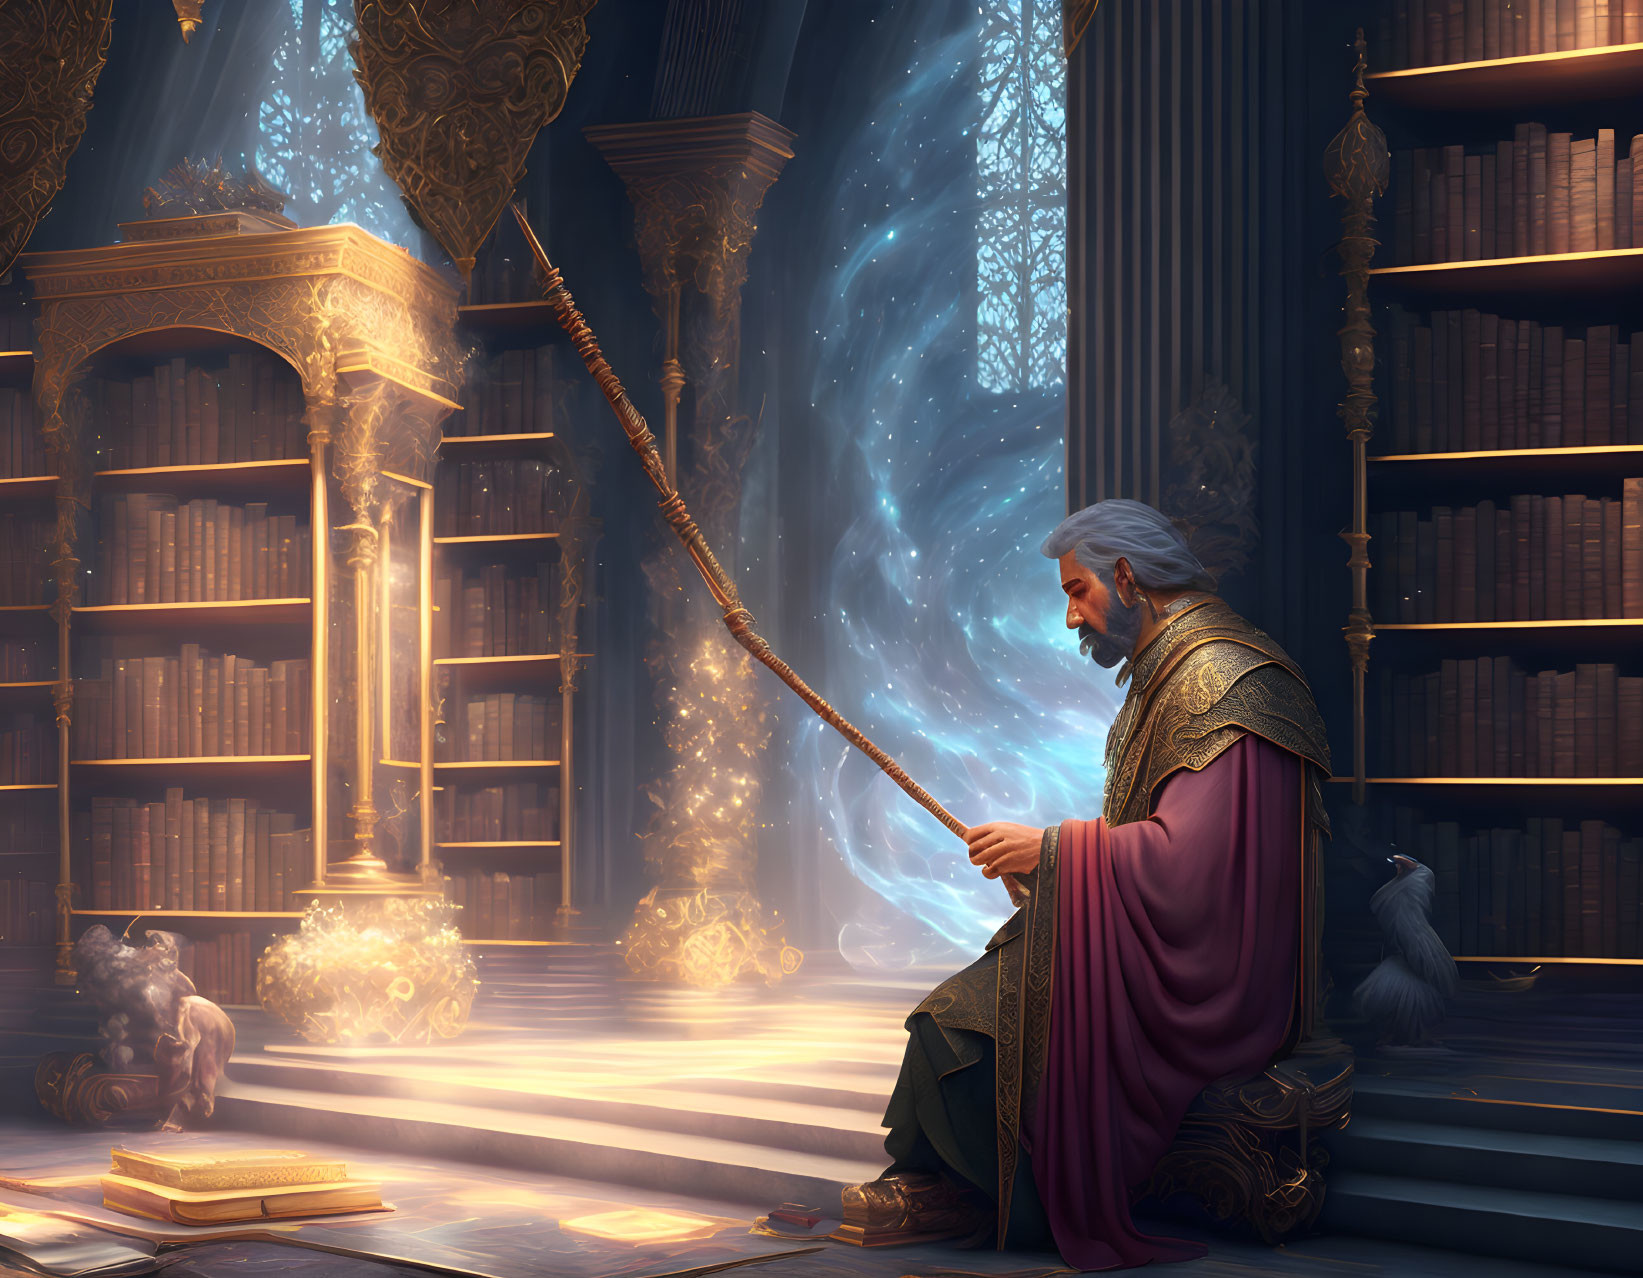 Elderly wizard in grand library with magical portal and owl